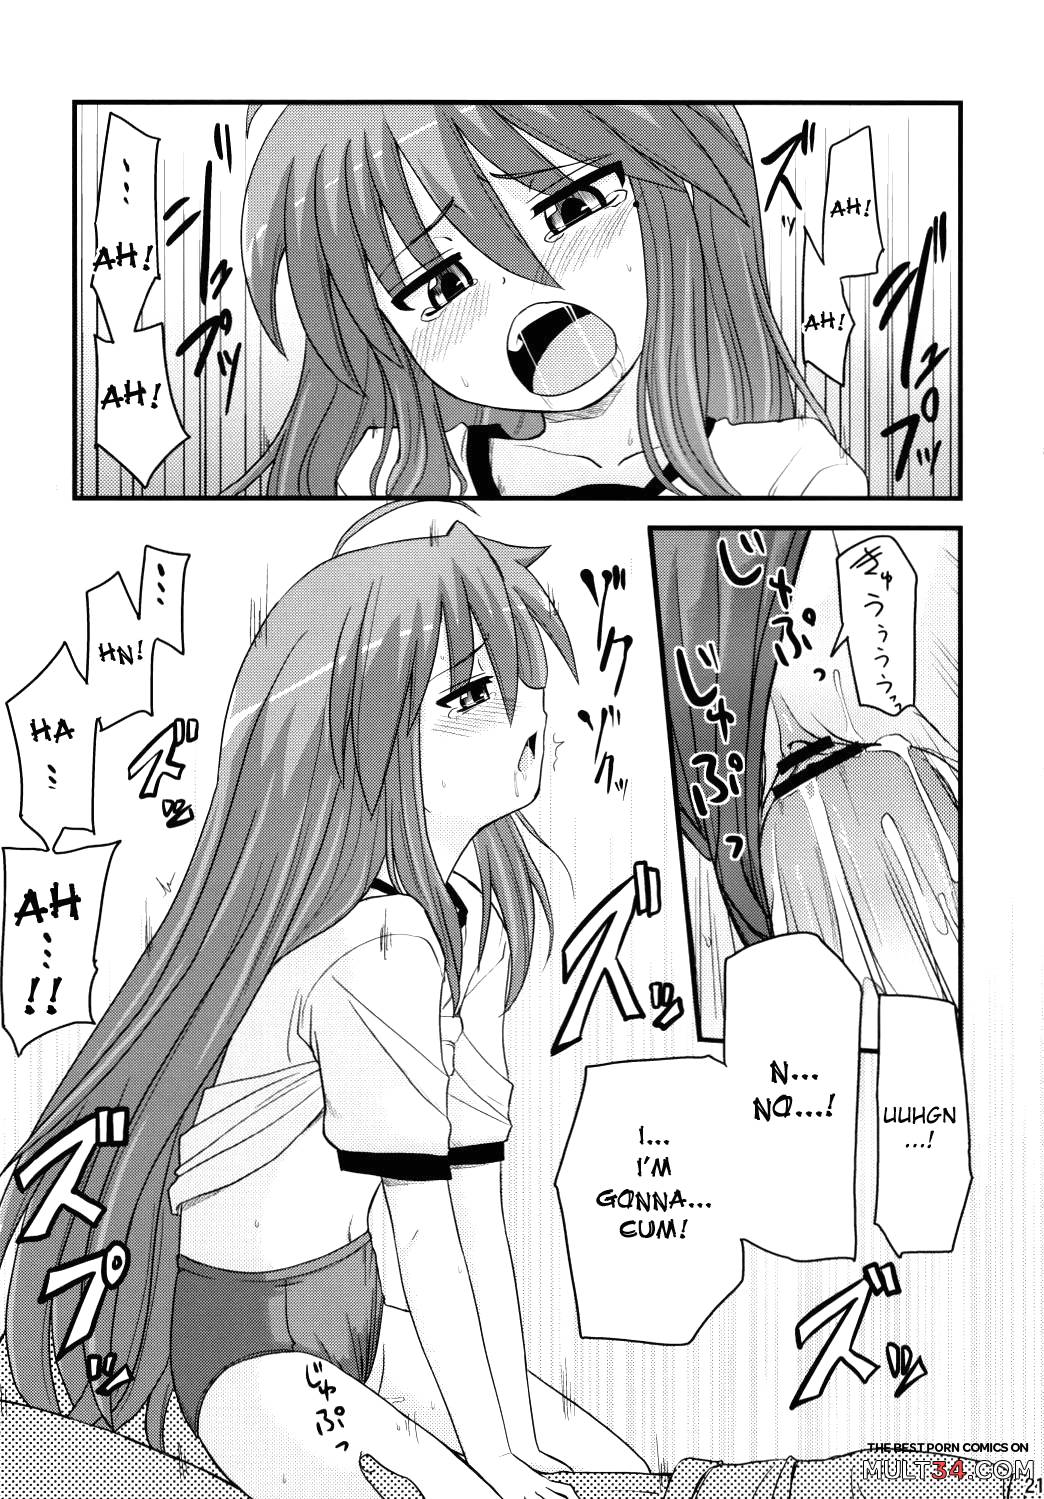 Konata and Oh-zu 4 people each and every one + 1 page 17